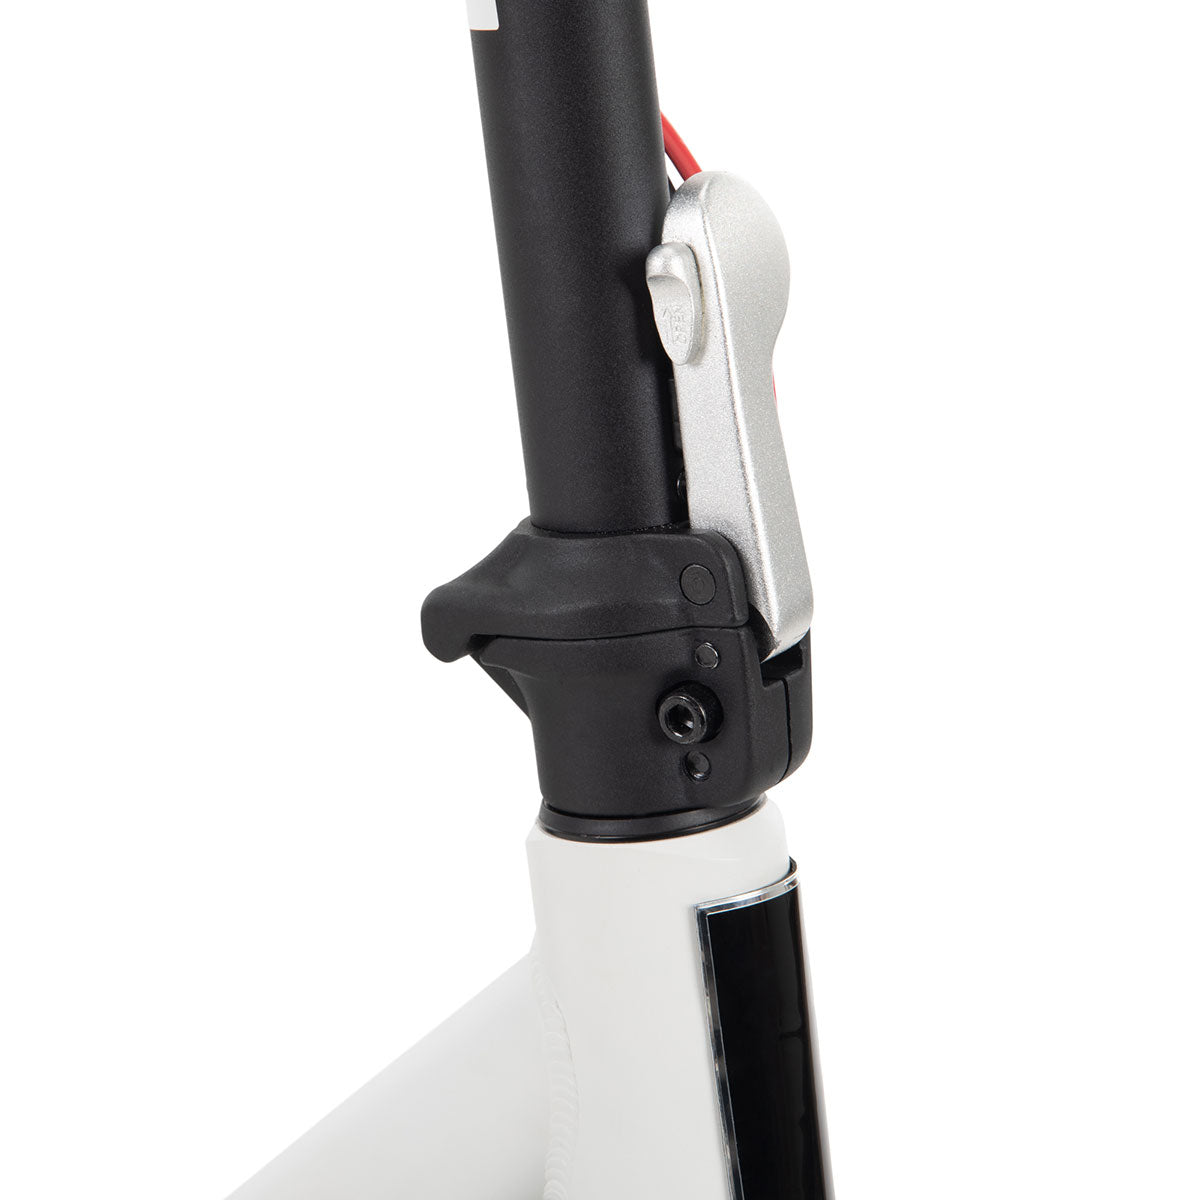 Scooter eléctrico Huffy ZX3 Lithium Color Blanco